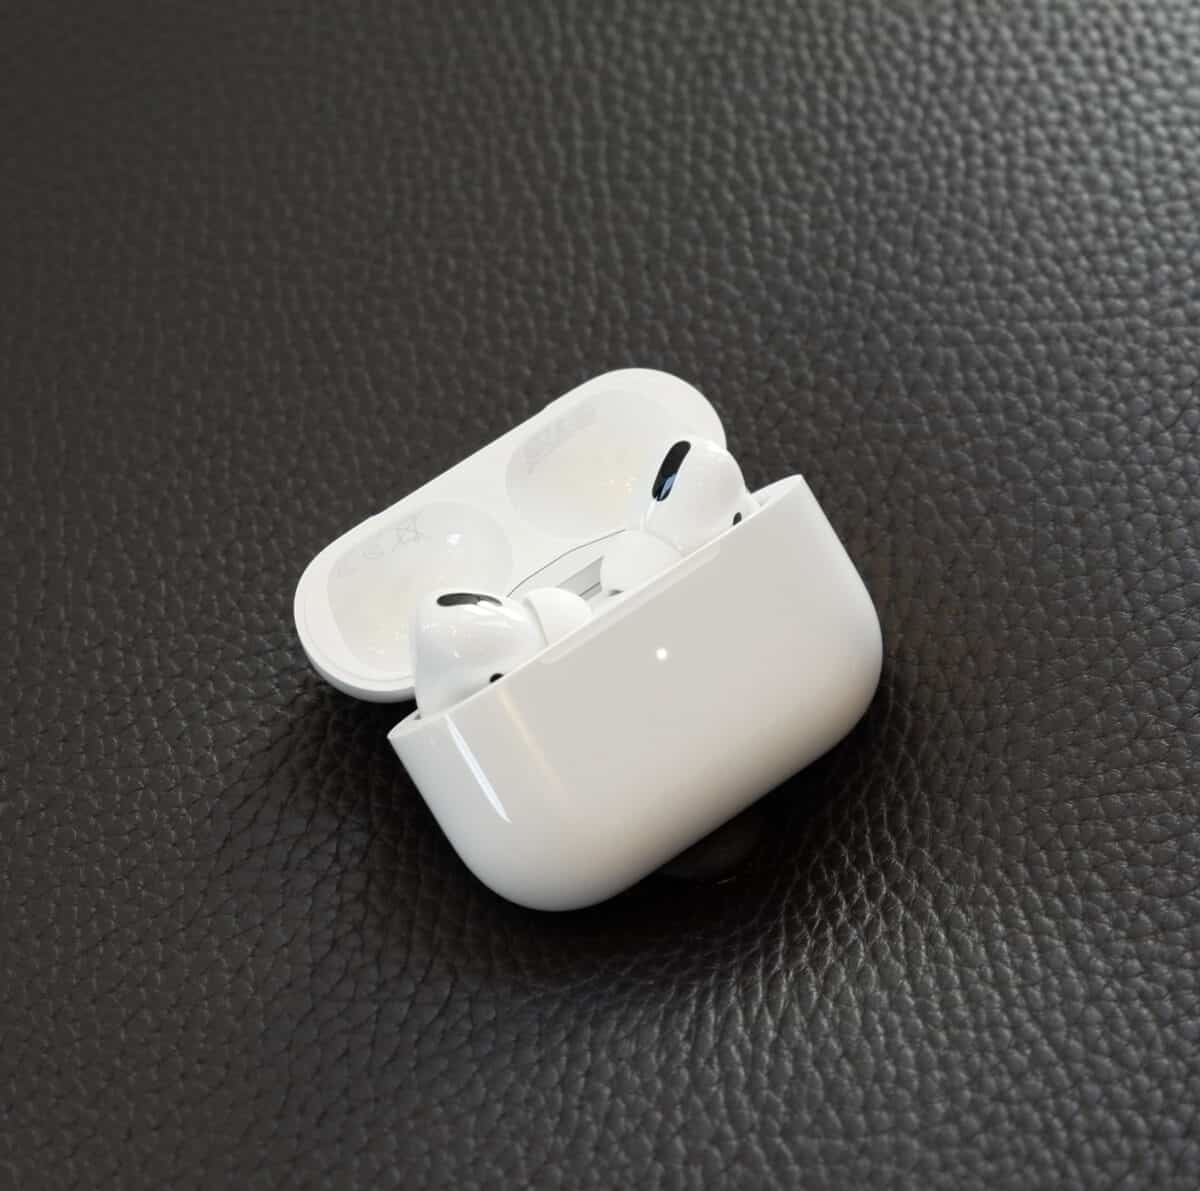 reasons to avoid the apple airpods pro